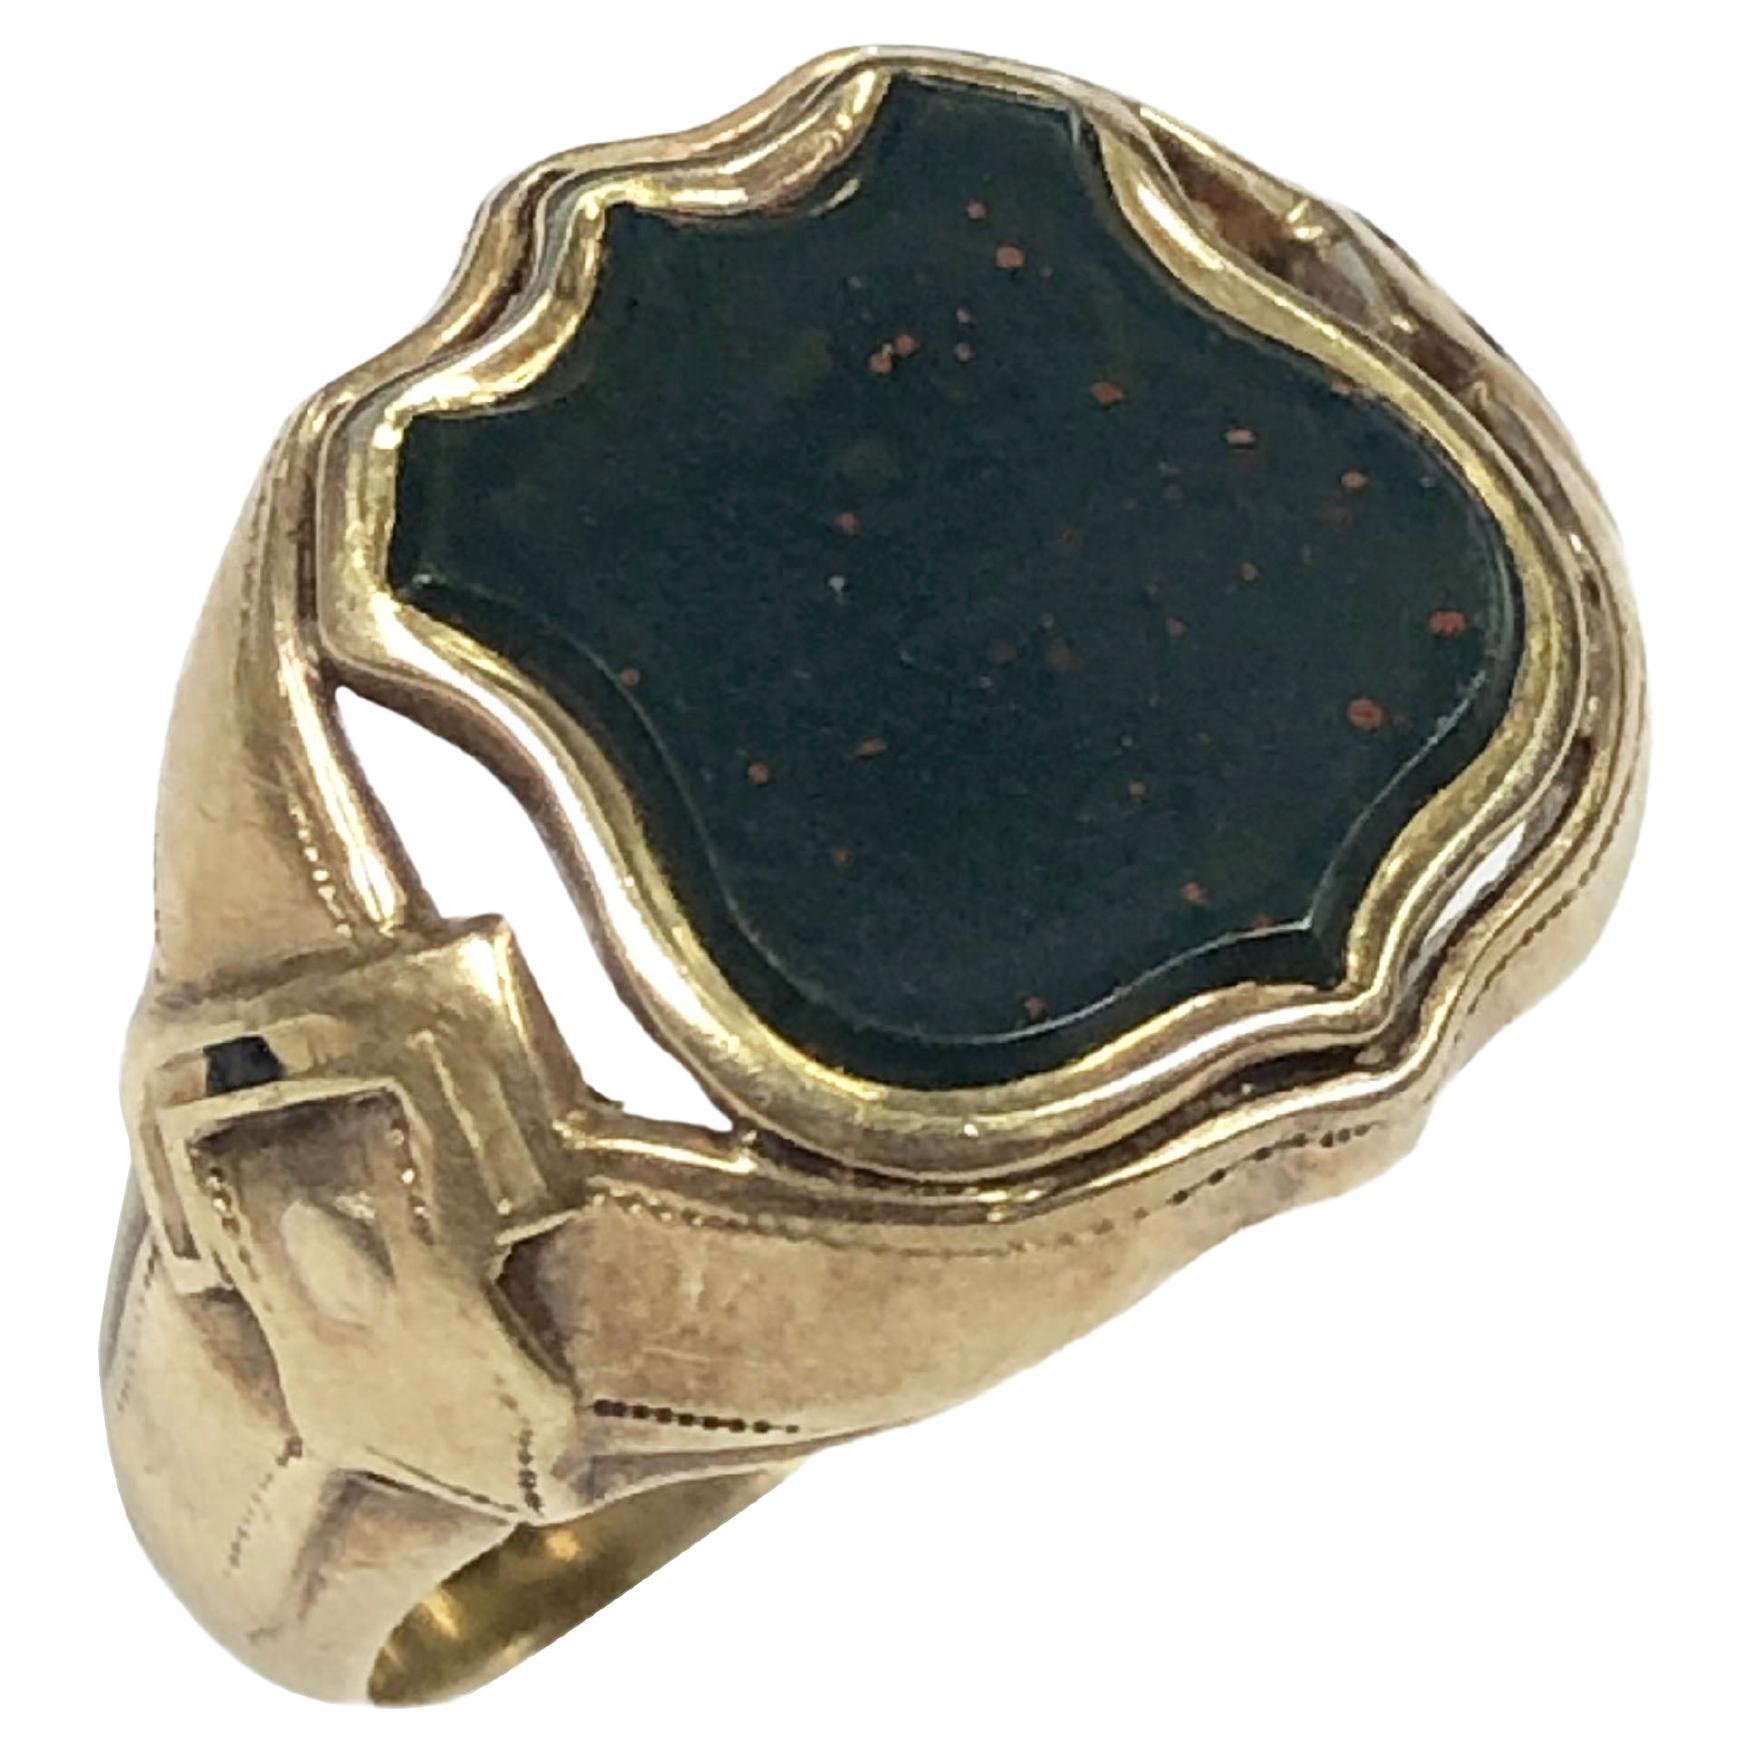 Antique Gold and Blood Stone Signet Ring